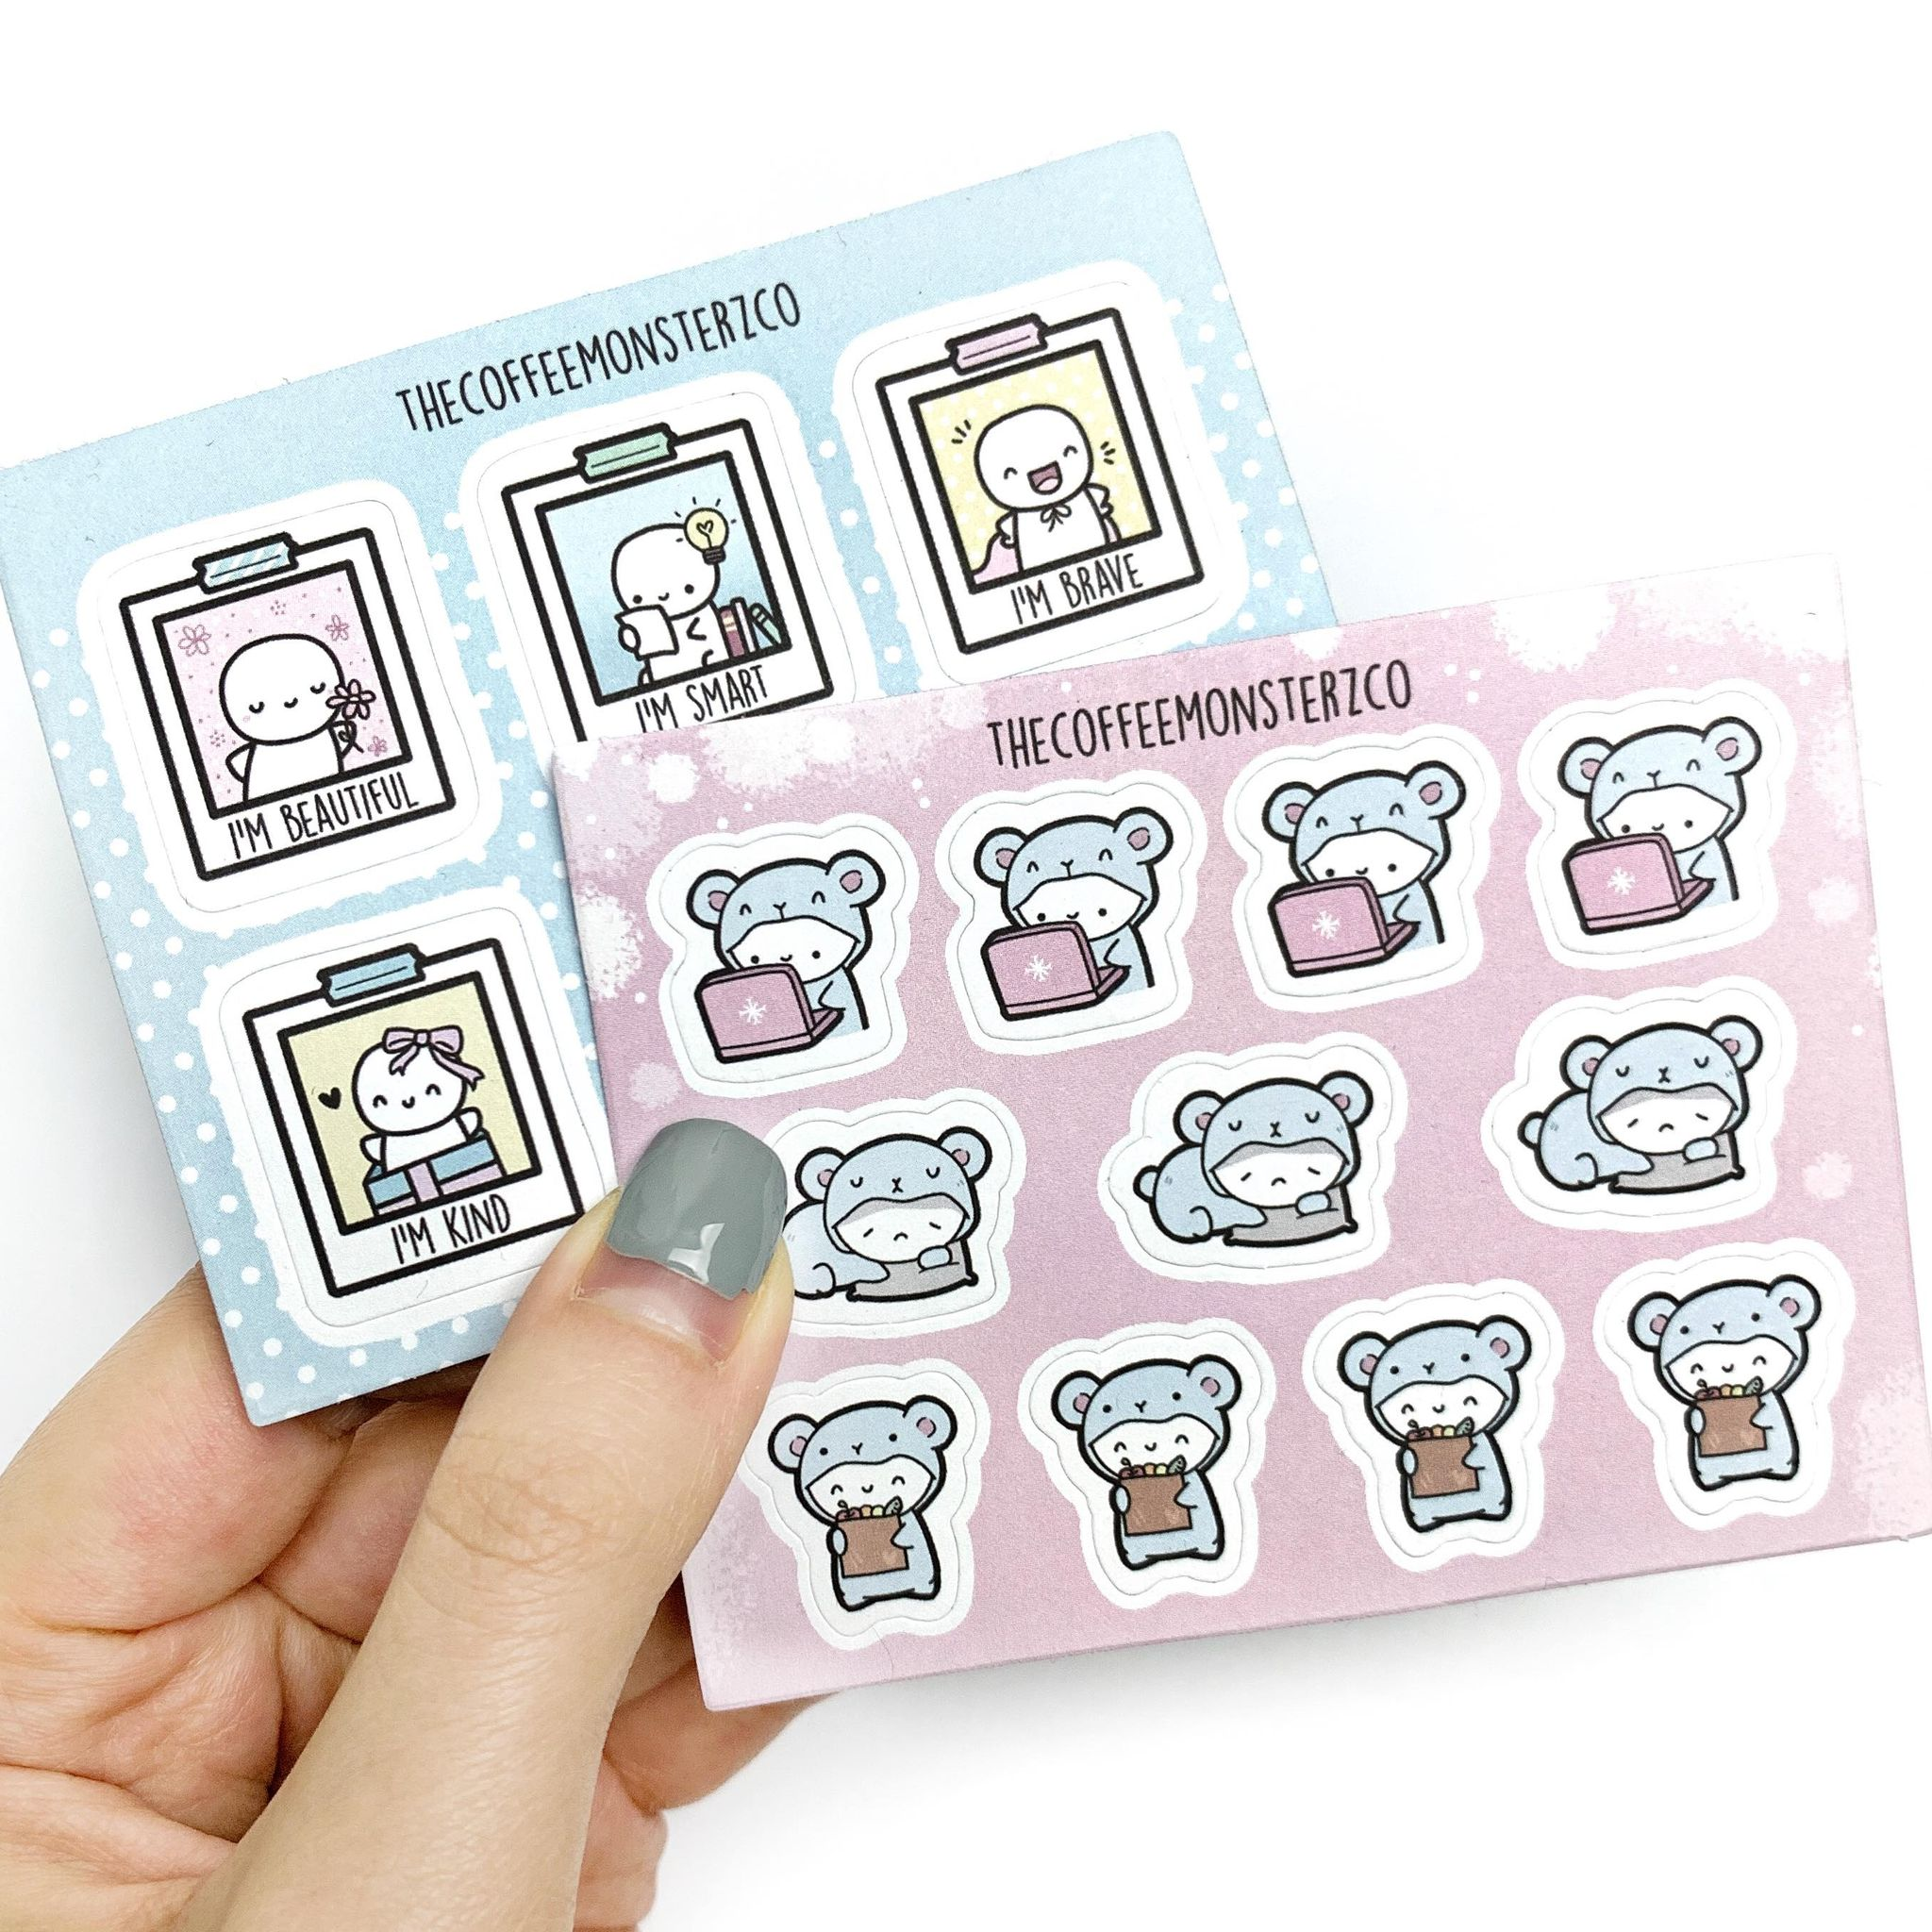 OVERSTOCK Mini Sticker Sheet Pack (1 SET PER PERSON) - TheCoffeeMonsterzCo